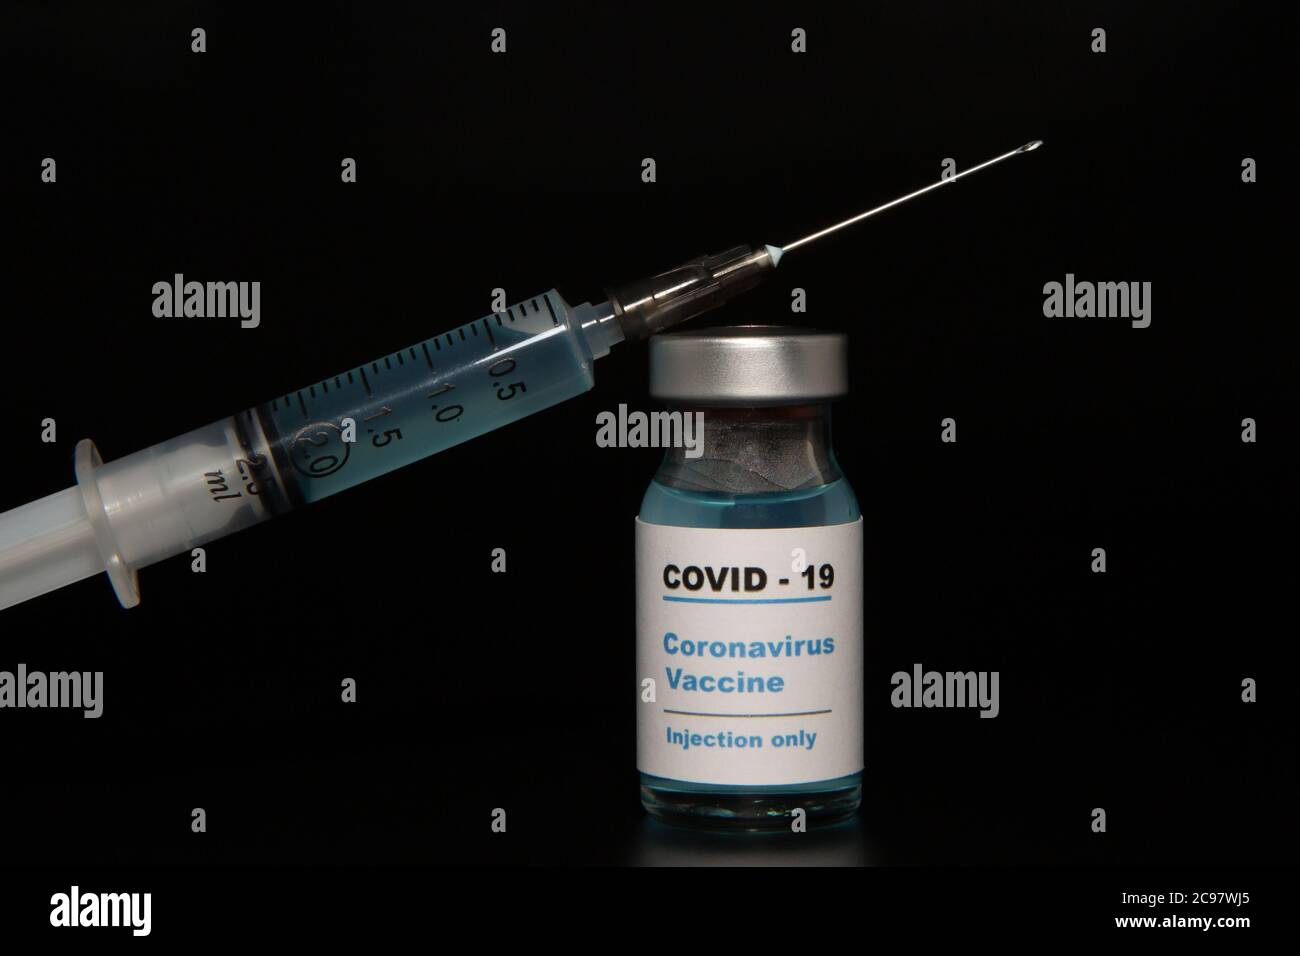 Small vaccine bottle (phial) with a label that read 'Covid - 19 Corona virus Vaccine injection only' & a medical syringe isolated on black Vaccination Stock Photo